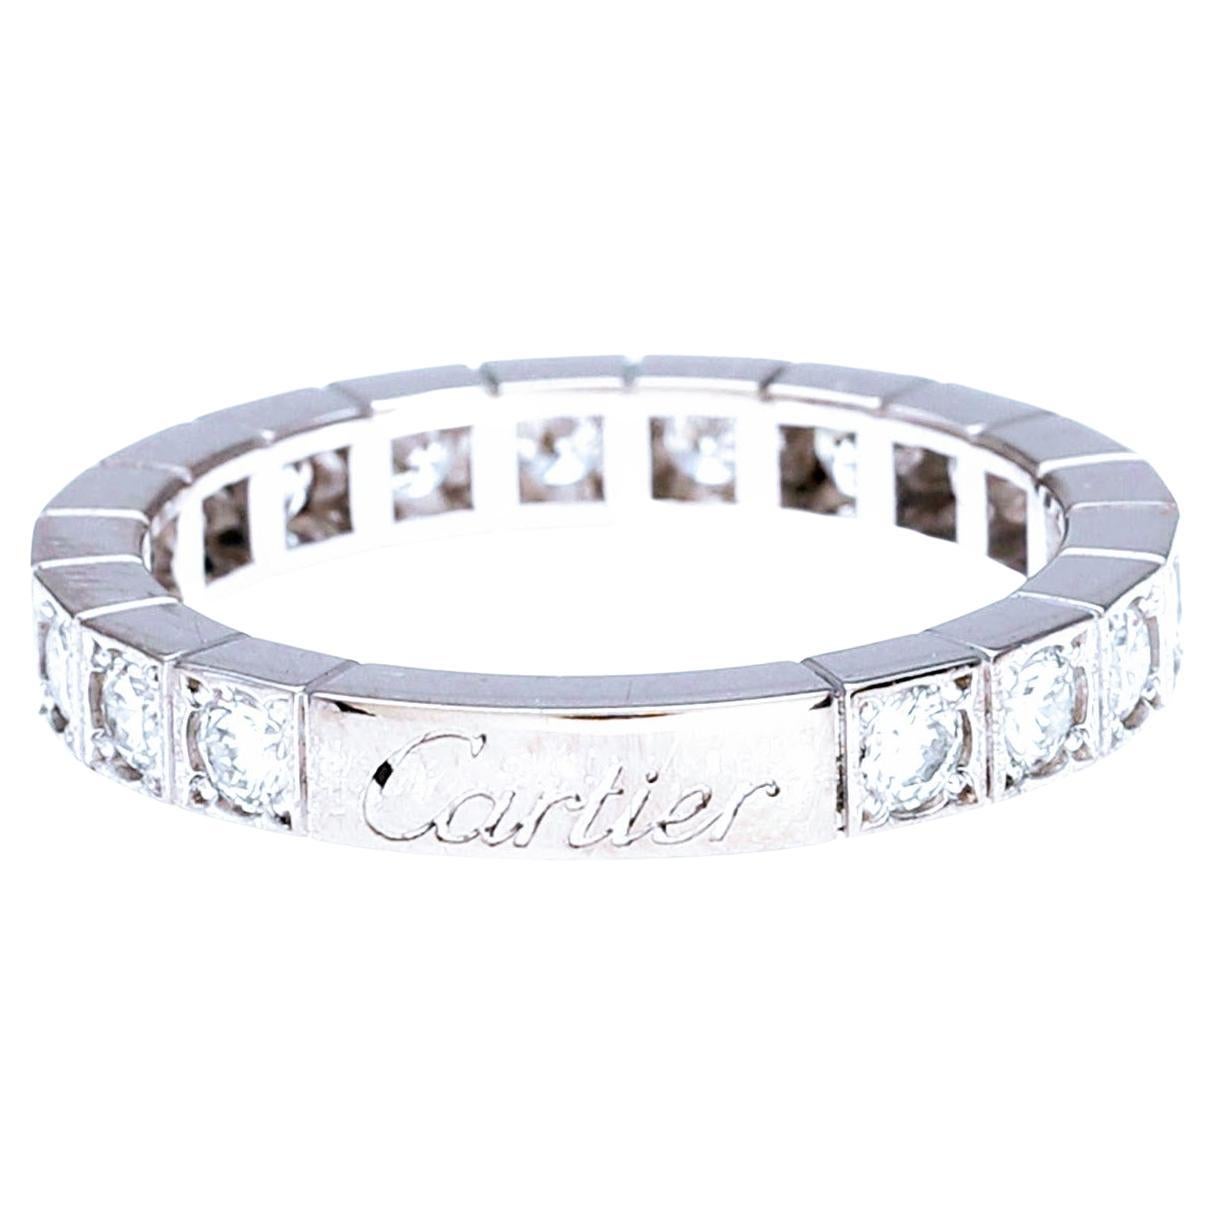 Authentic and original Cartier ring in f white gold 18 Karats weight 4.50 grams. With 18 Diamonds Brilliant cut brilliant estimated total weight 1.05 cts. It is signed and with serial number 53 NA068. Ring Size Number 13 Europe/ 53 milllimeters. 
